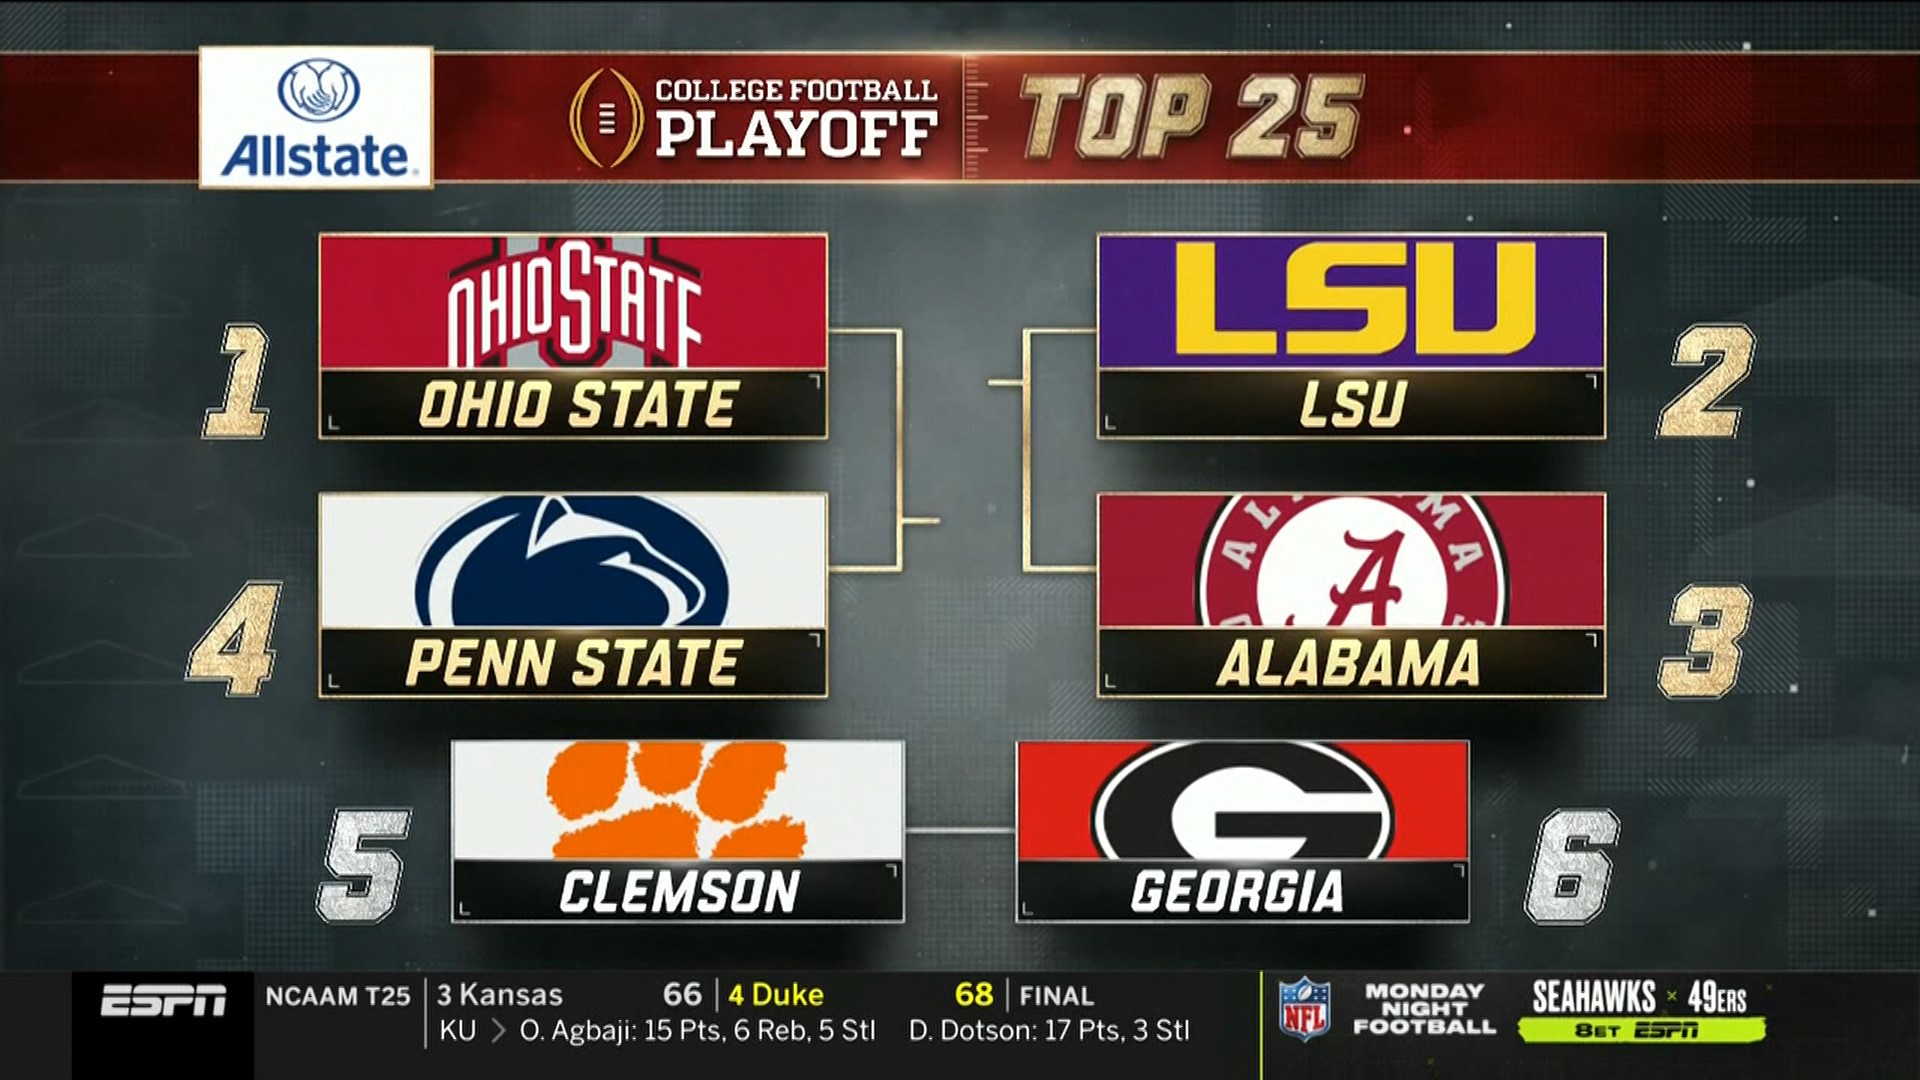 Sound off on the official College Football Playoff Rankings